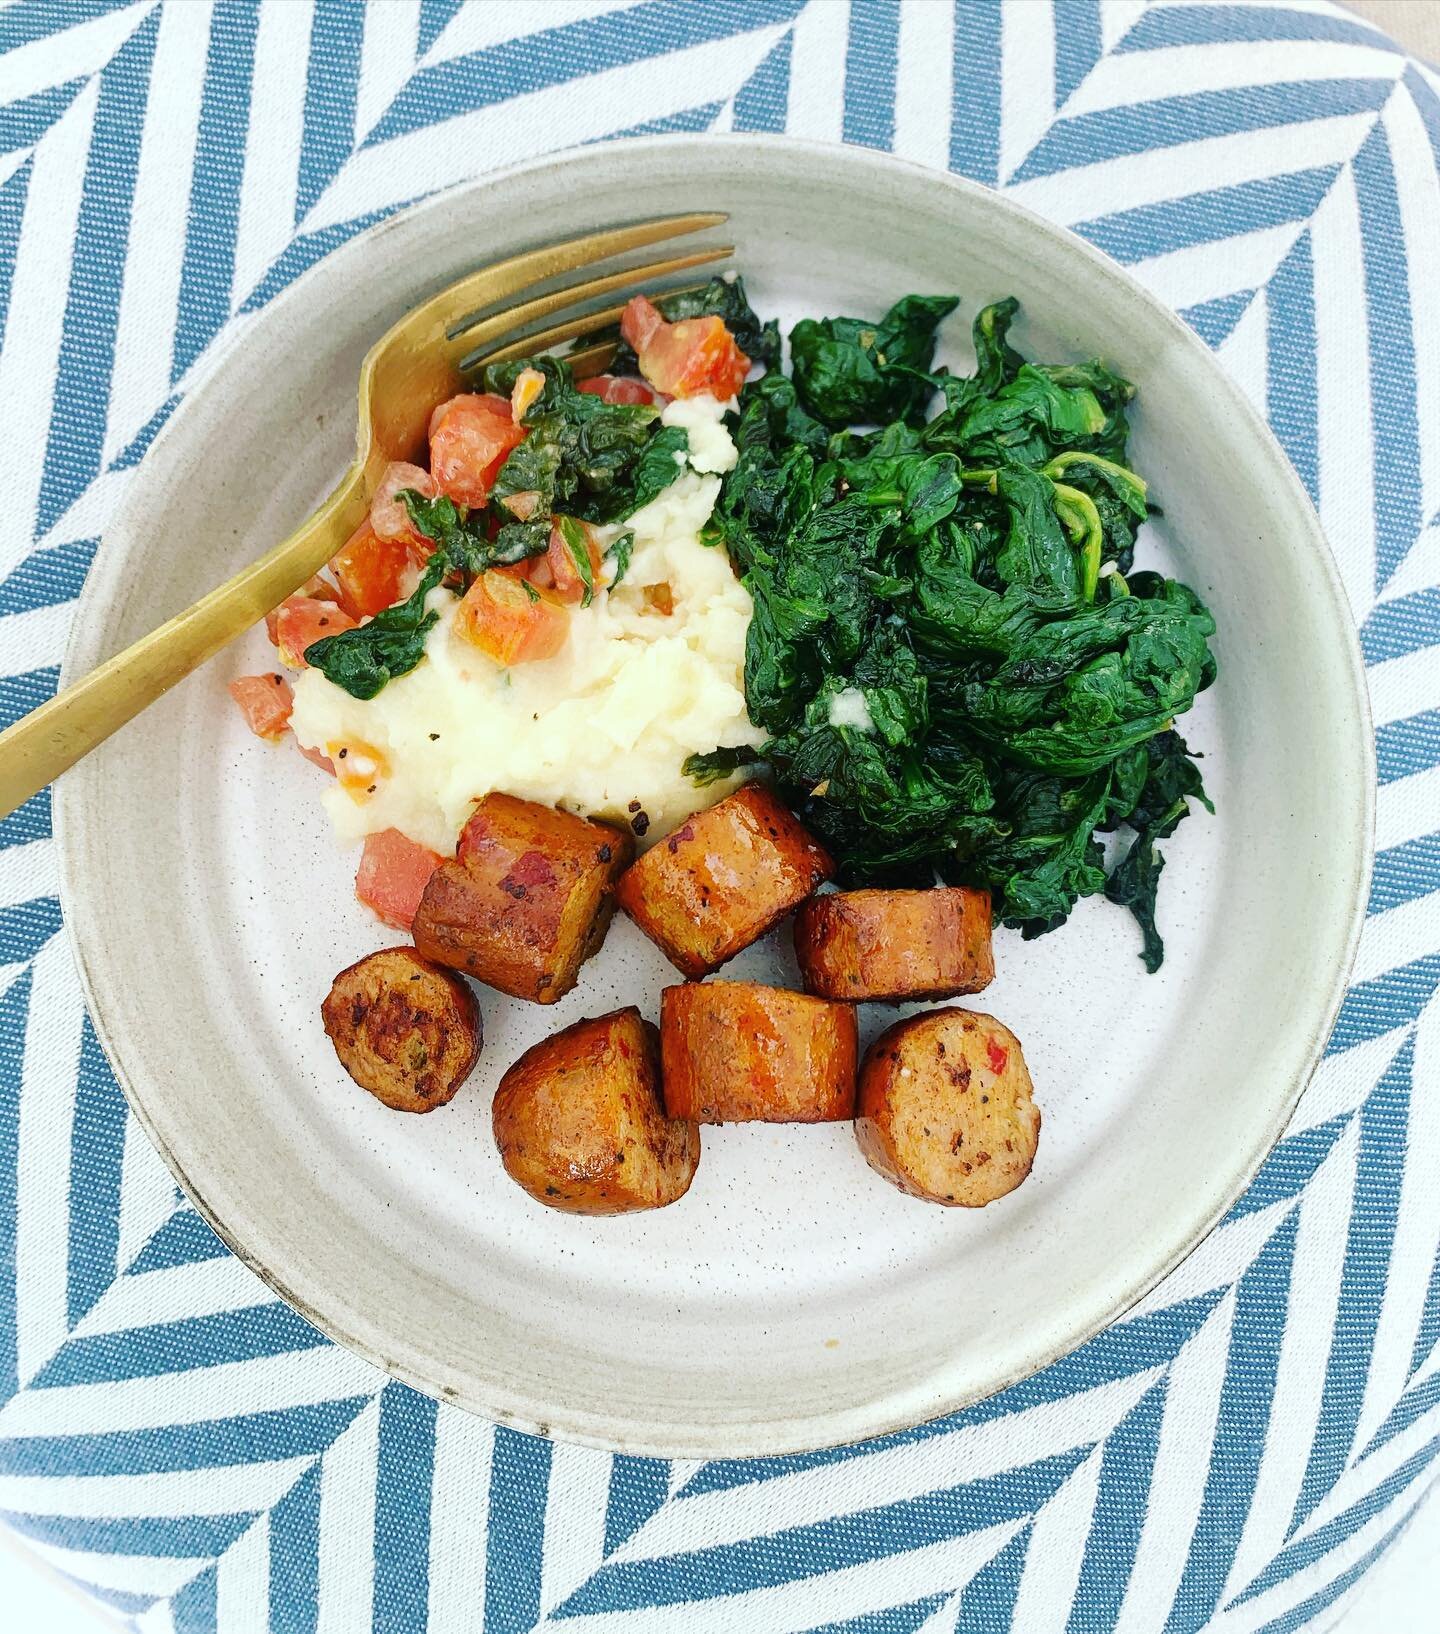 @whole30 Day 28 is almost done and it&rsquo;s been a hectic one! &bull; Aren&rsquo;t Sunday&rsquo;s supposed to be chill??? &bull; This fire roasted red pepper @applegate sausage was super yum with mashed potatoes, saut&eacute;ed spinach and diced to